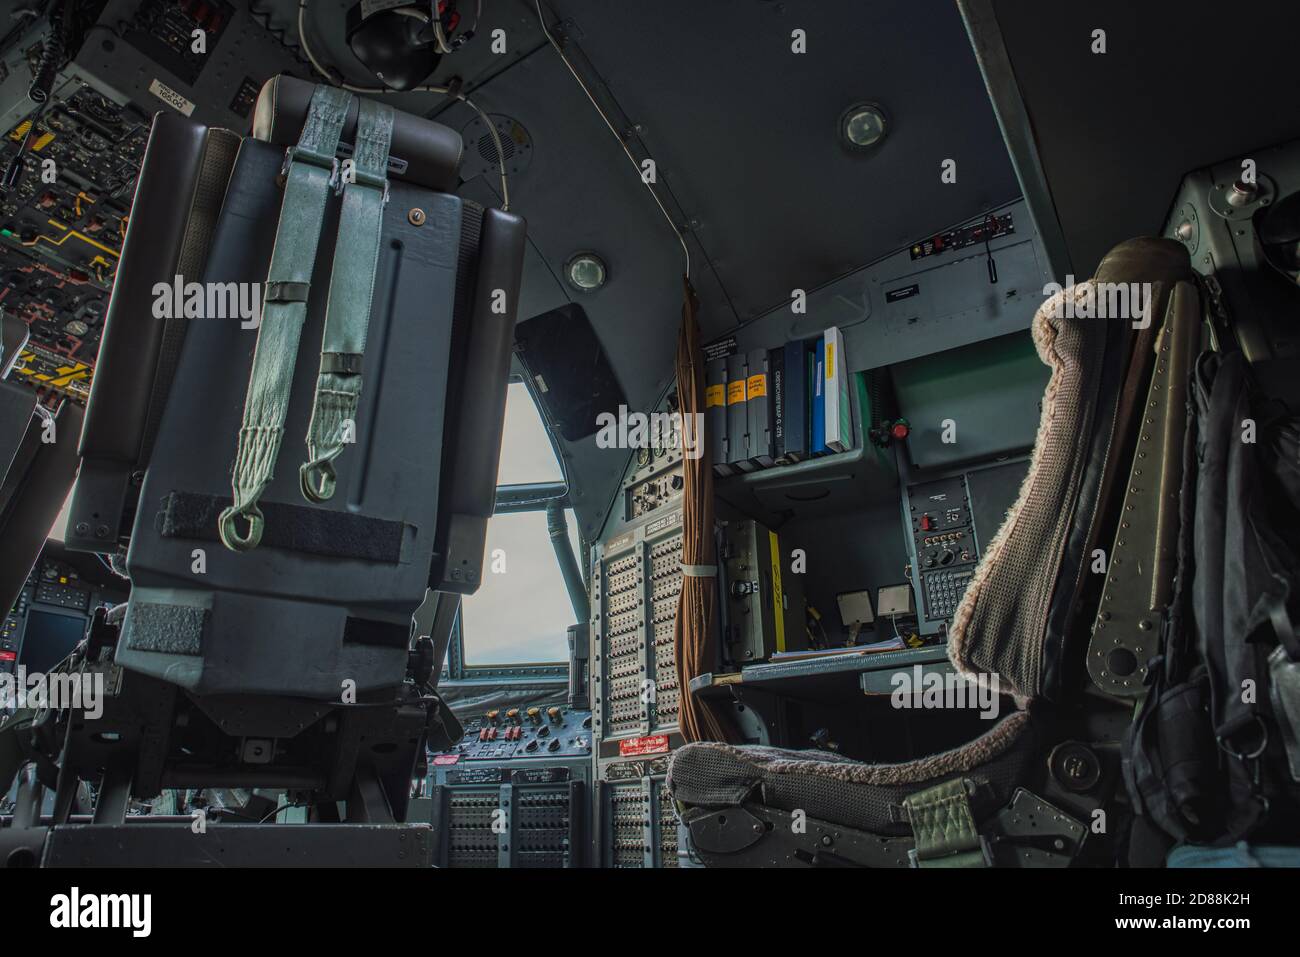 Military heavy cargo aircraft C130, C 130 Hercules cockpit or cabin with complex knobs and controls conveys aviation, aeronautics, navigation concept Stock Photo